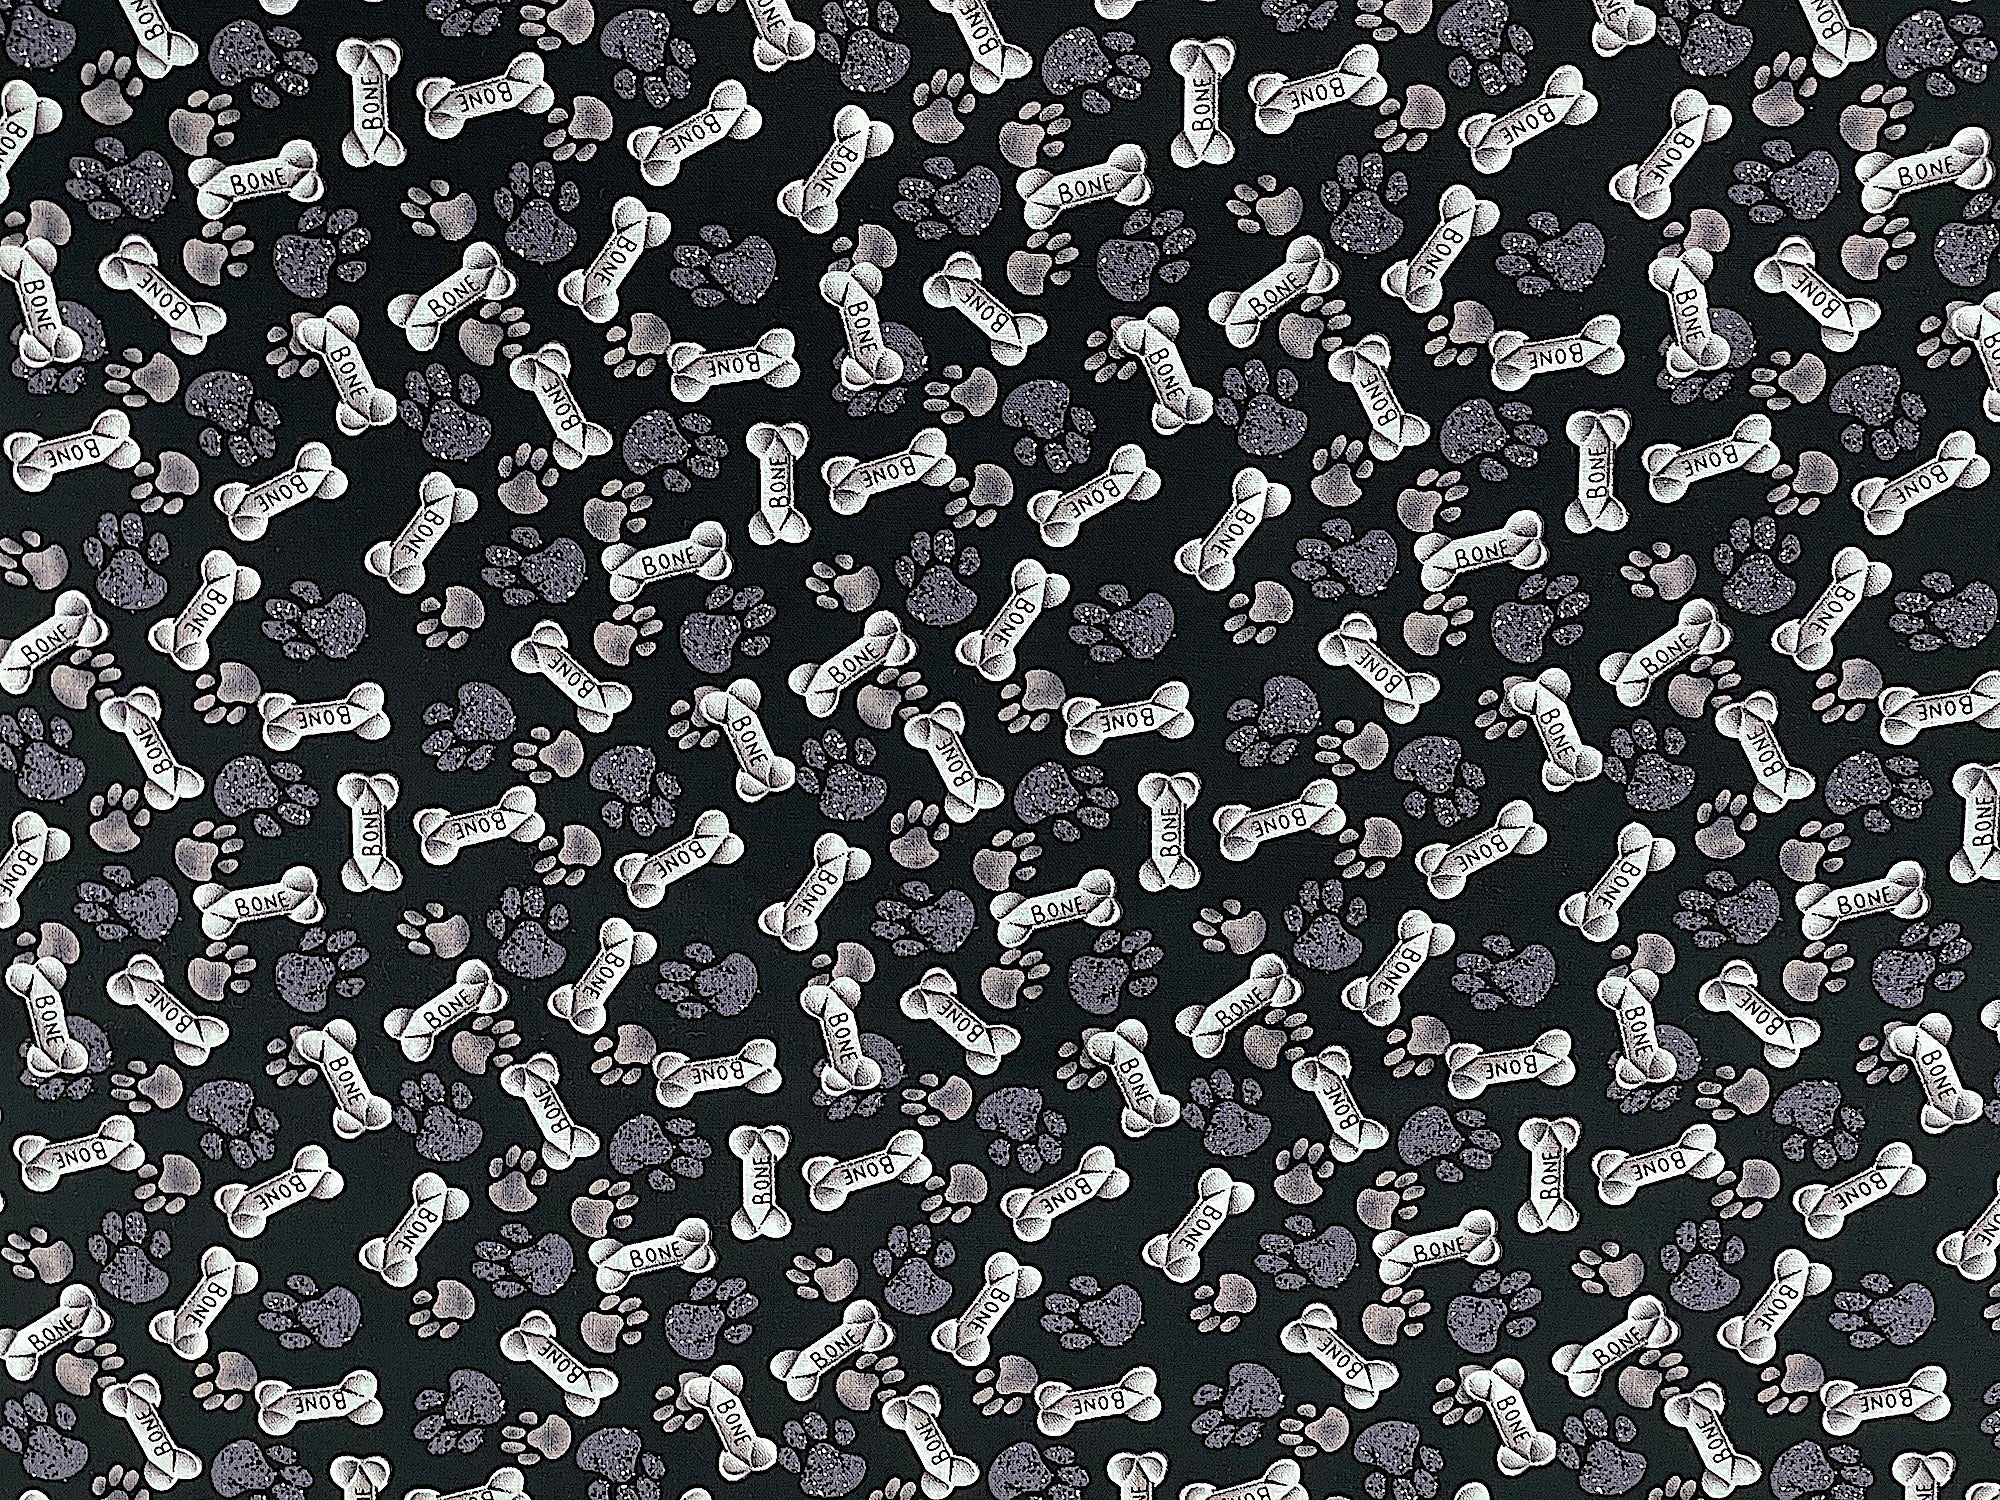 This fabric is called Paws & Bones. This black cotton fabric is covered with dark grey paw prints and dog bones that say bone on them.